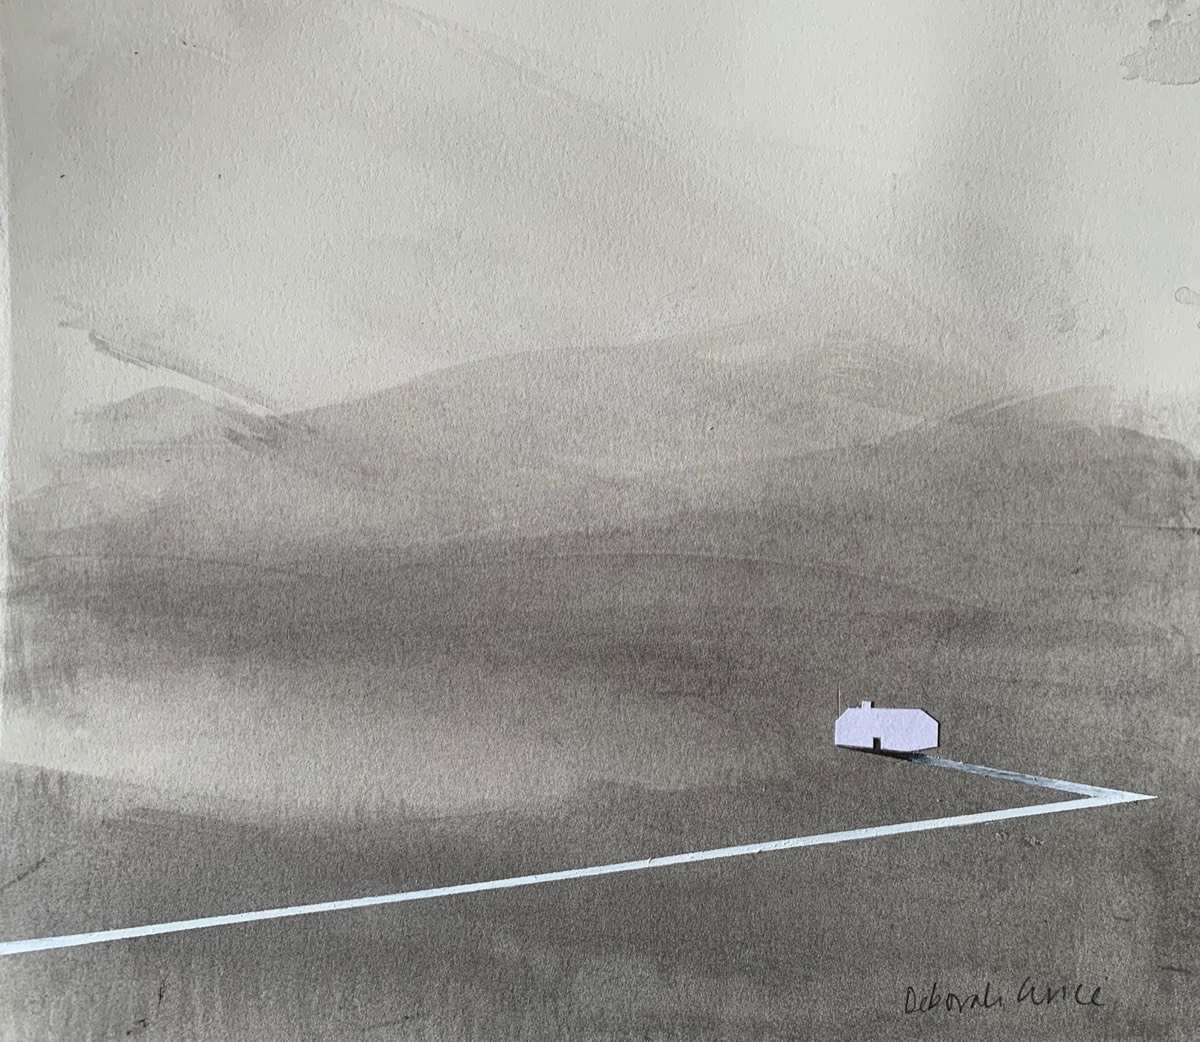 Deborah Grice ink drawing of a misty coastal landscape with an abstract white line and collaged white cottage